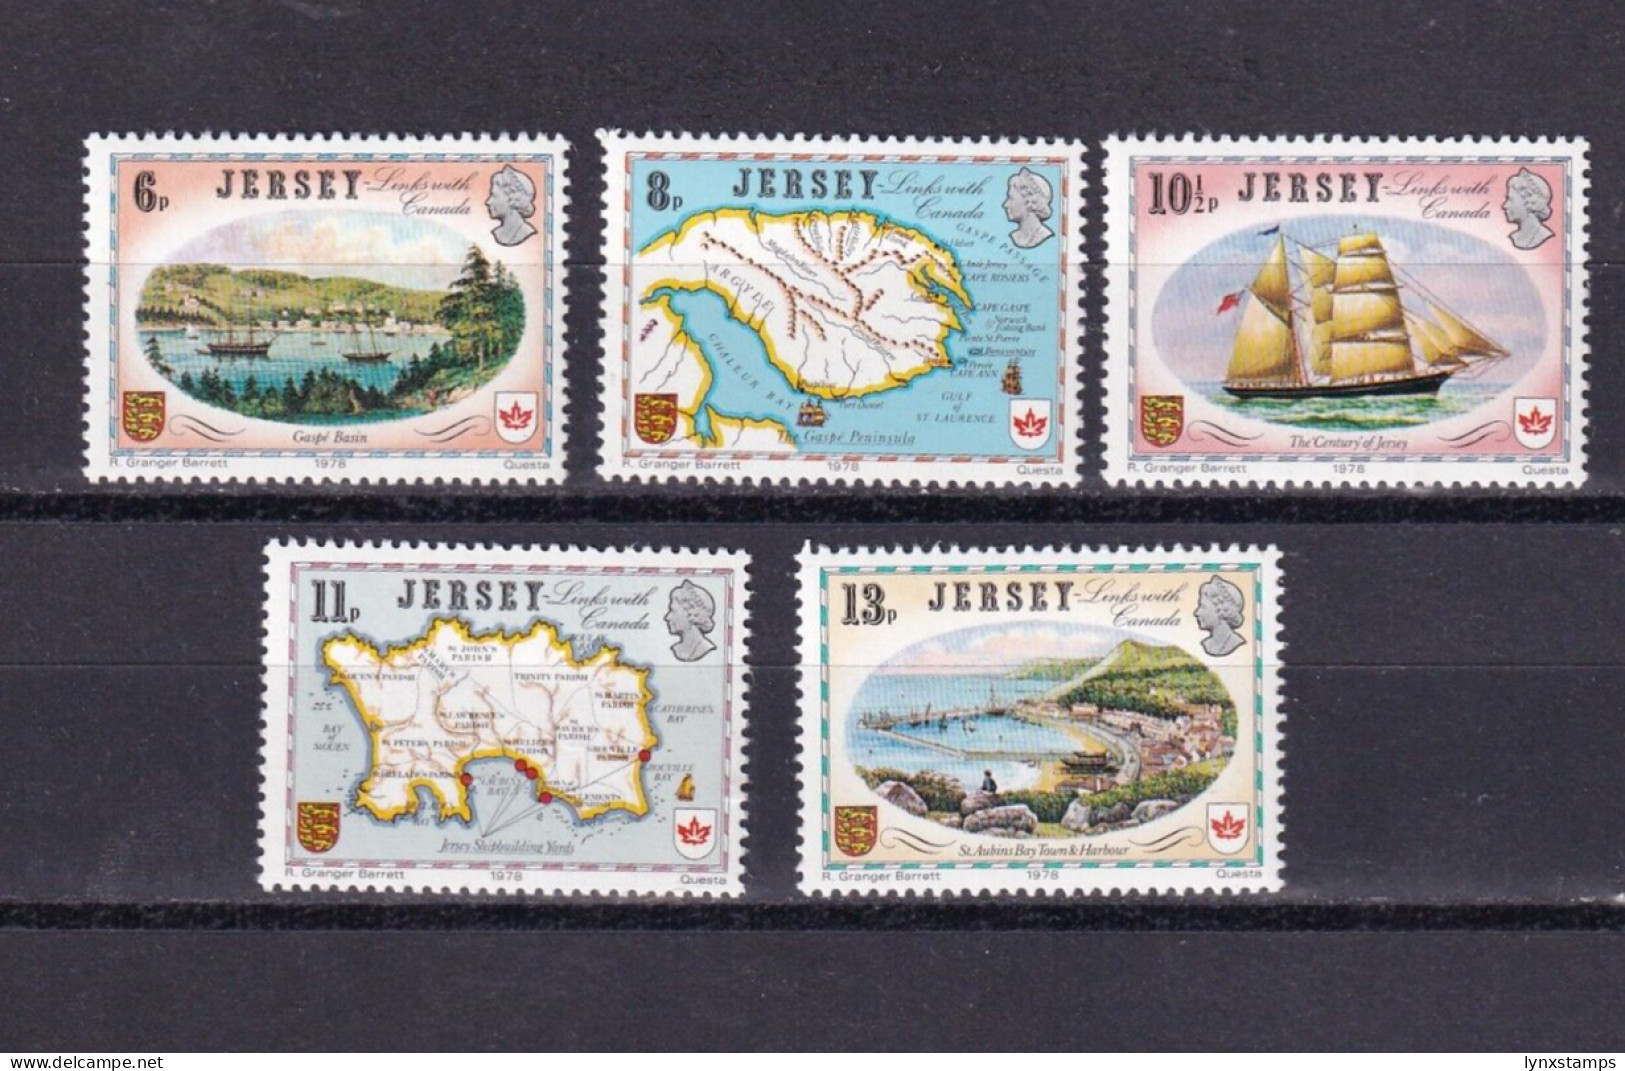 LI01 Jersey Great Britain 1978 Historical Relations Between Jersey And Canada - Local Issues